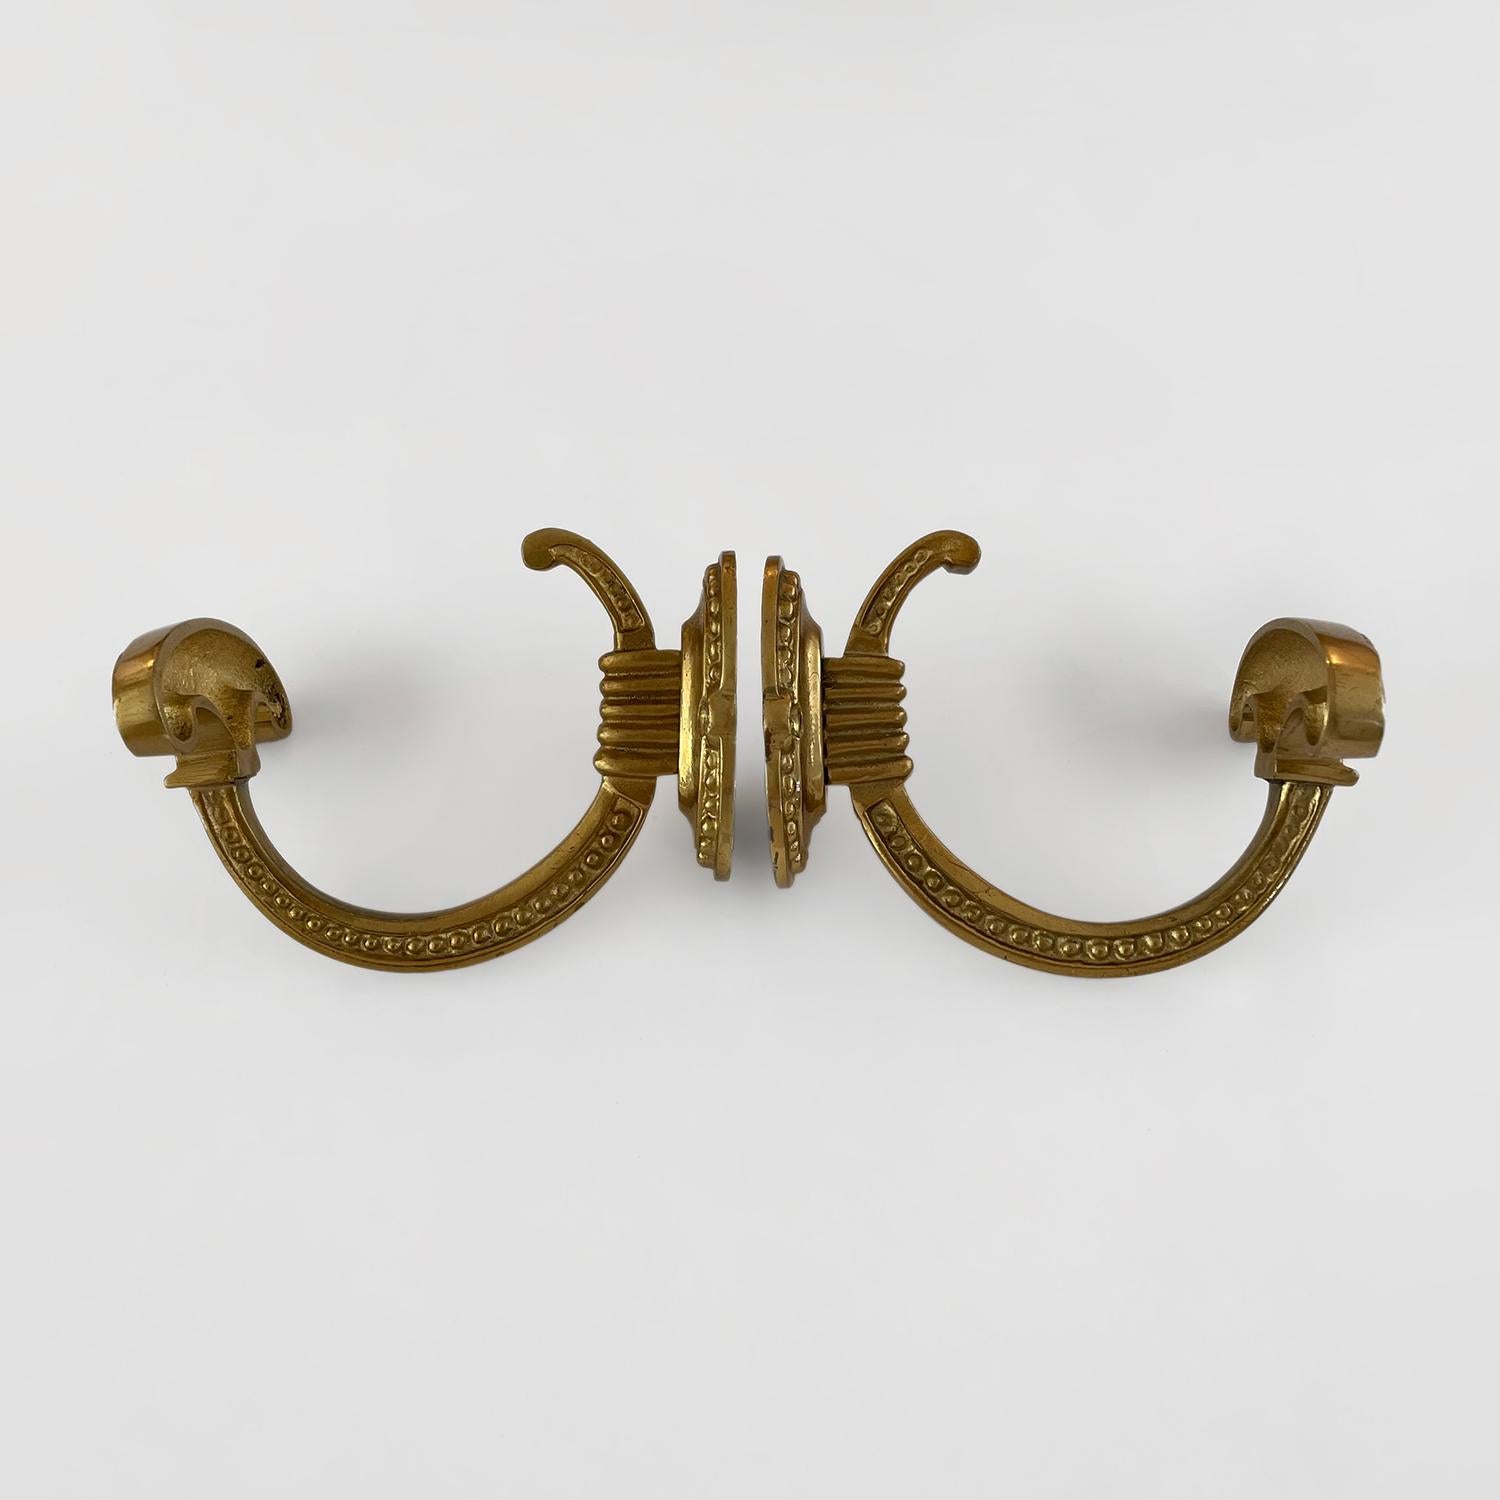 Pair of French Ornamental Brass Wall Hooks For Sale 3